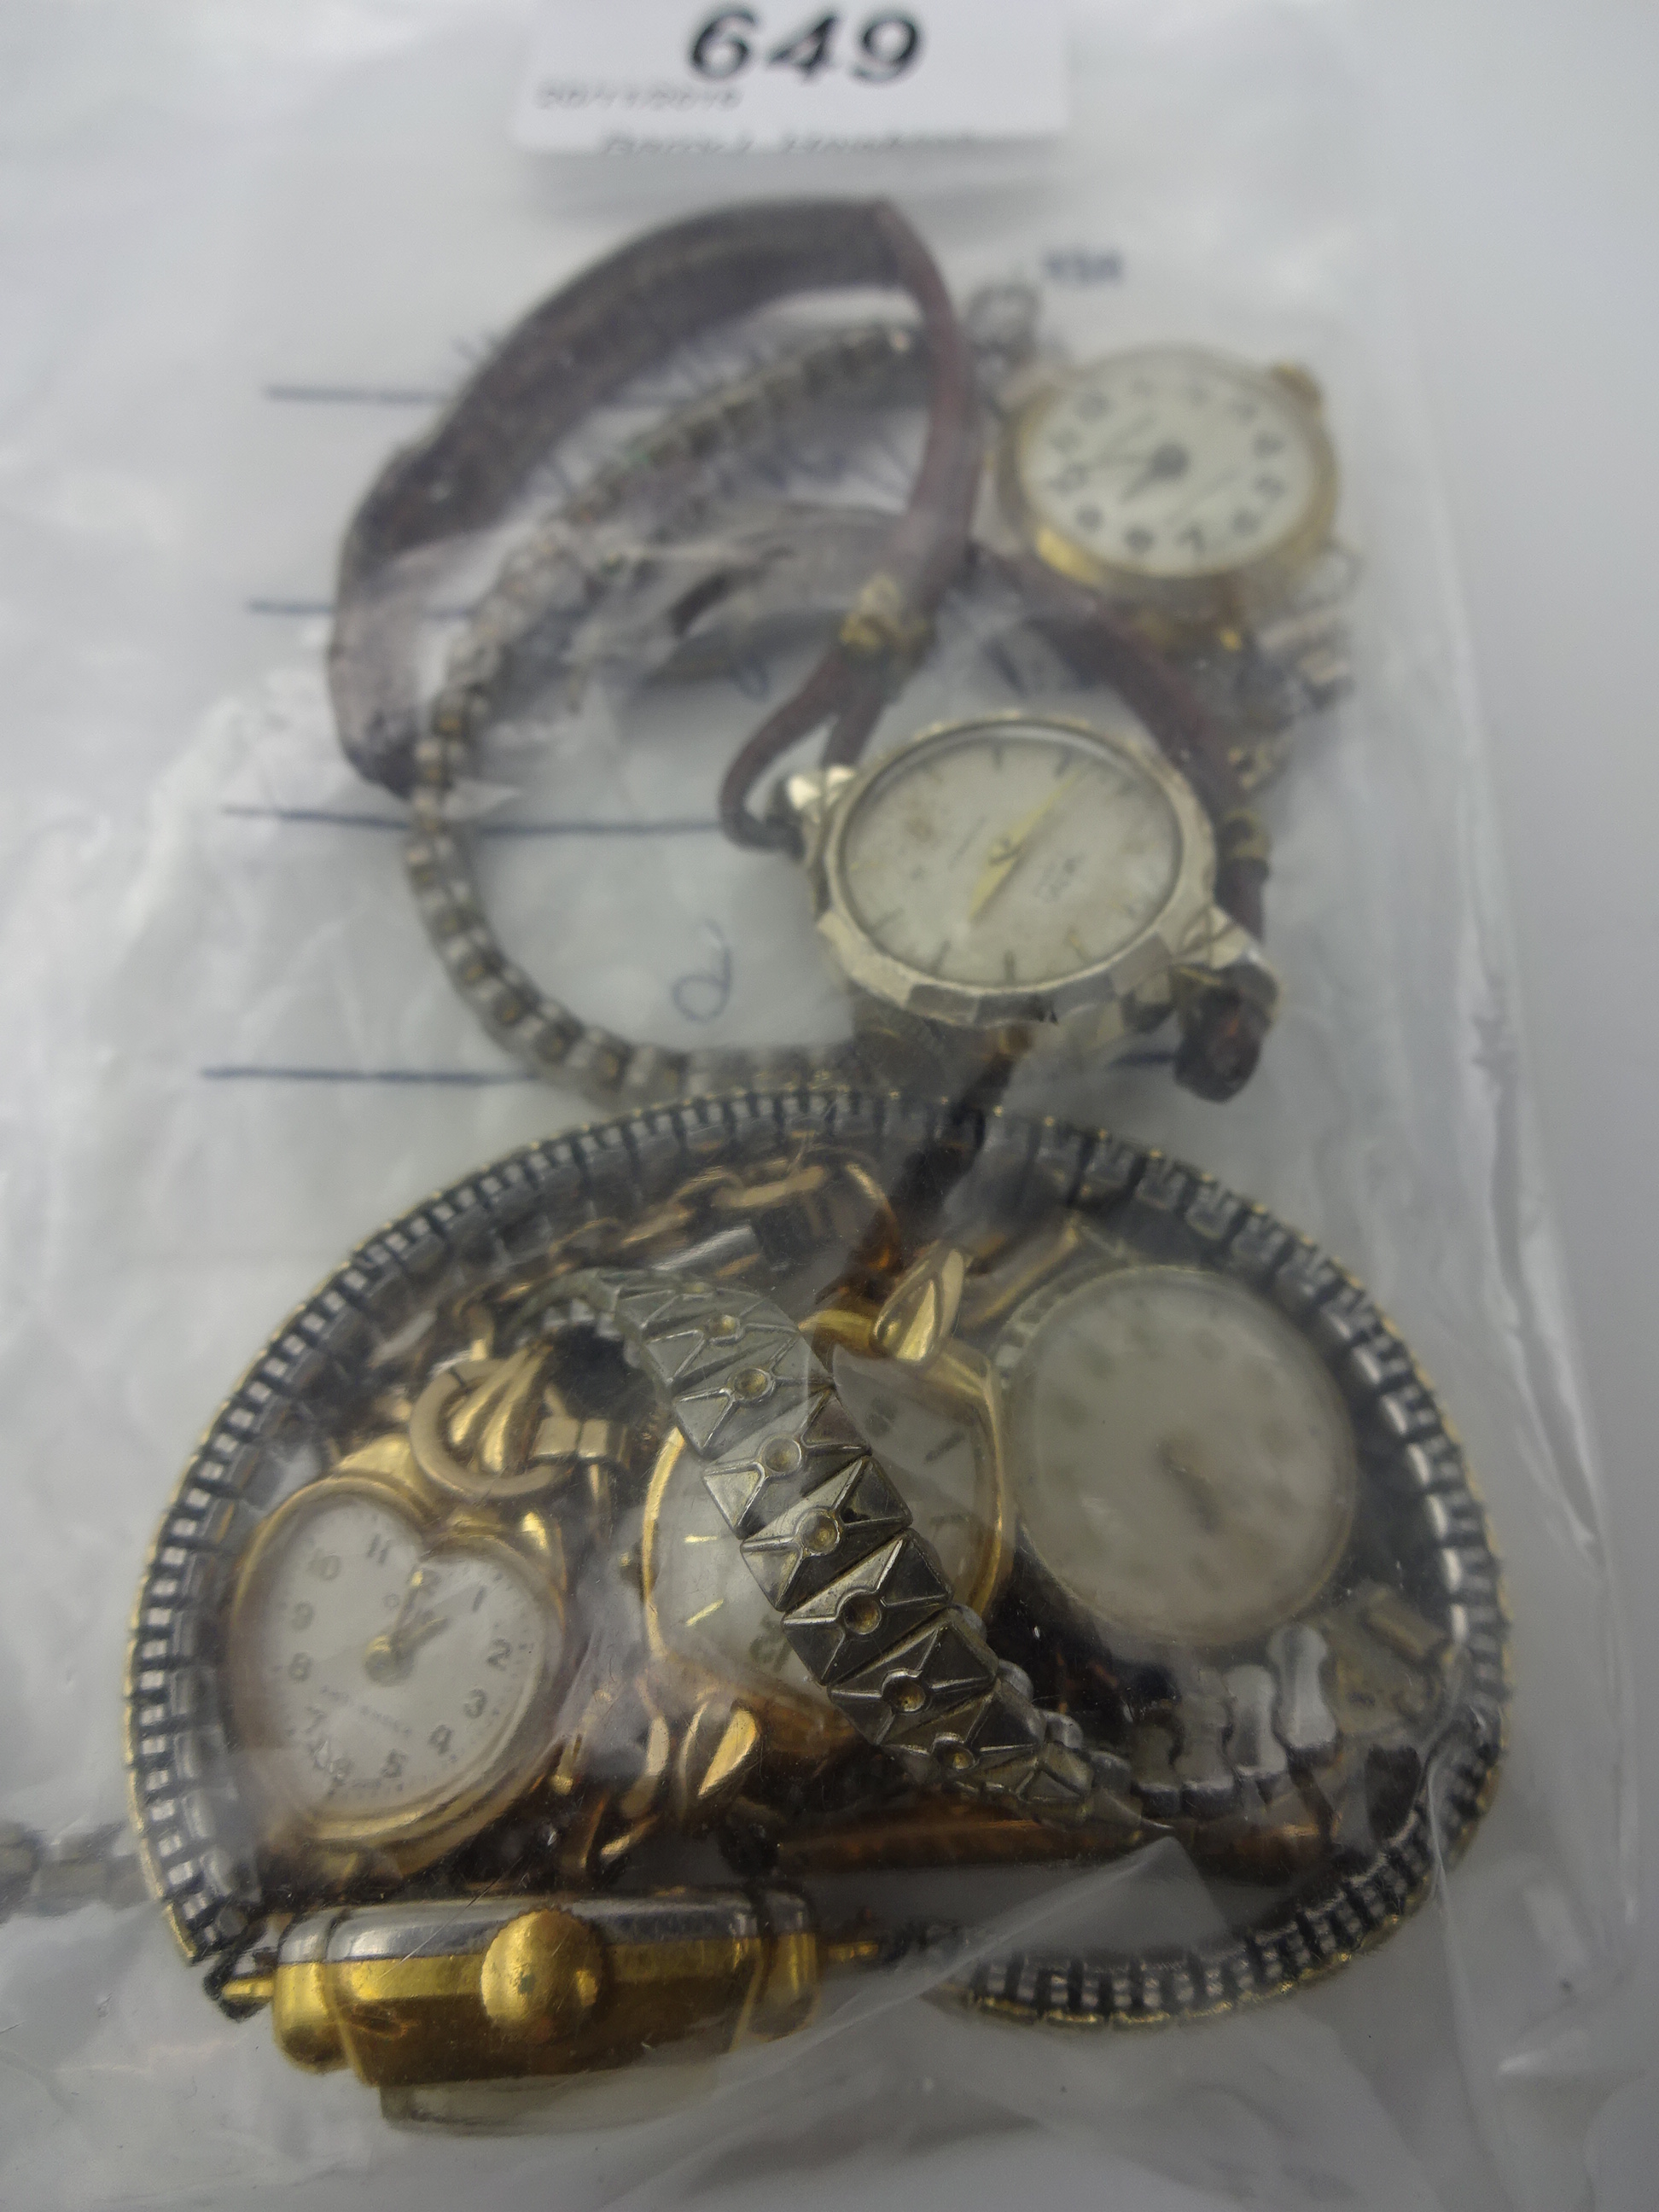 BAG OF MECHANICAL WATCHES